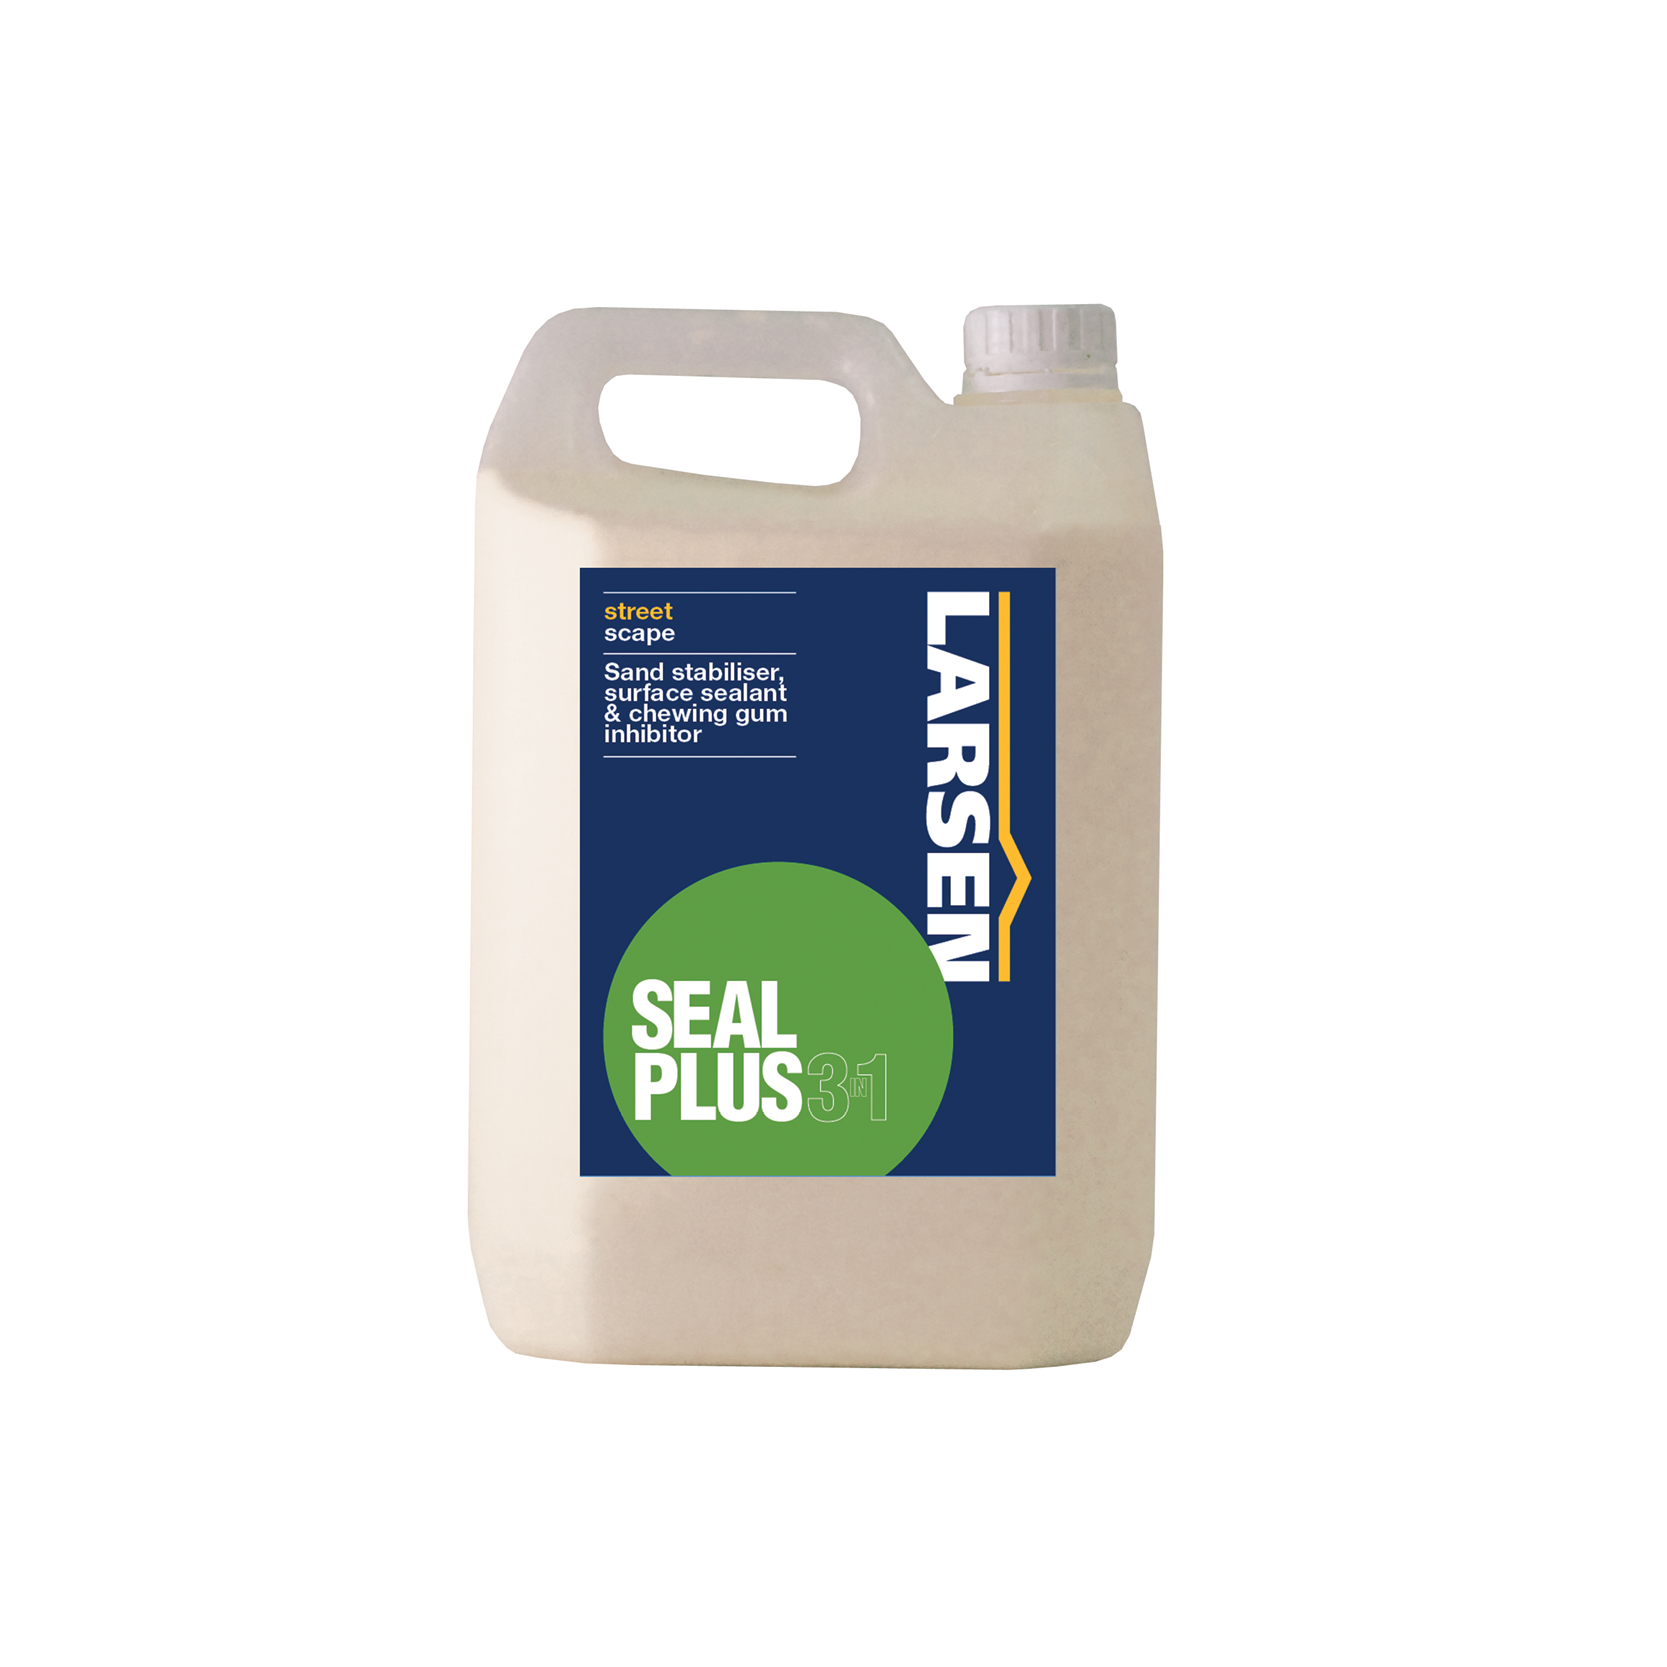 Seal Plus 3 in 1 - Larsen Building Products